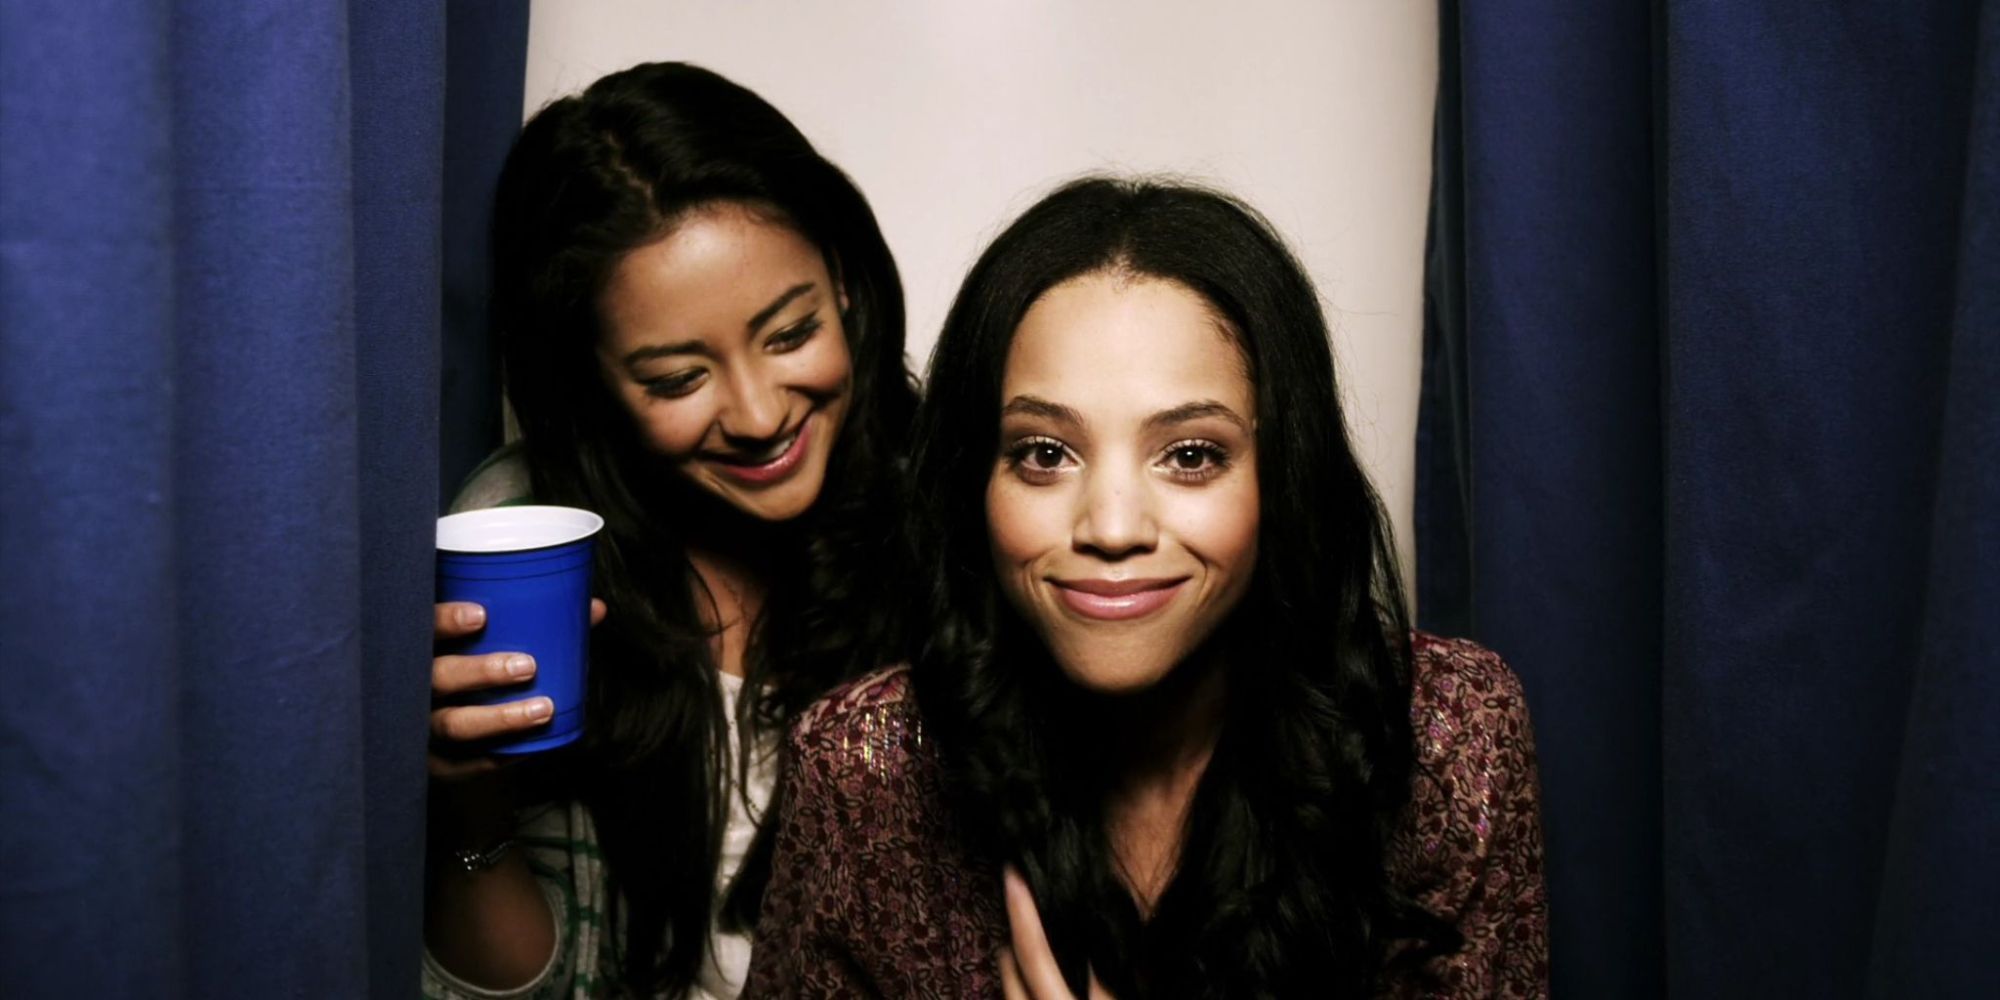 Emily and Maya from Pretty Little Liars in a photo booth